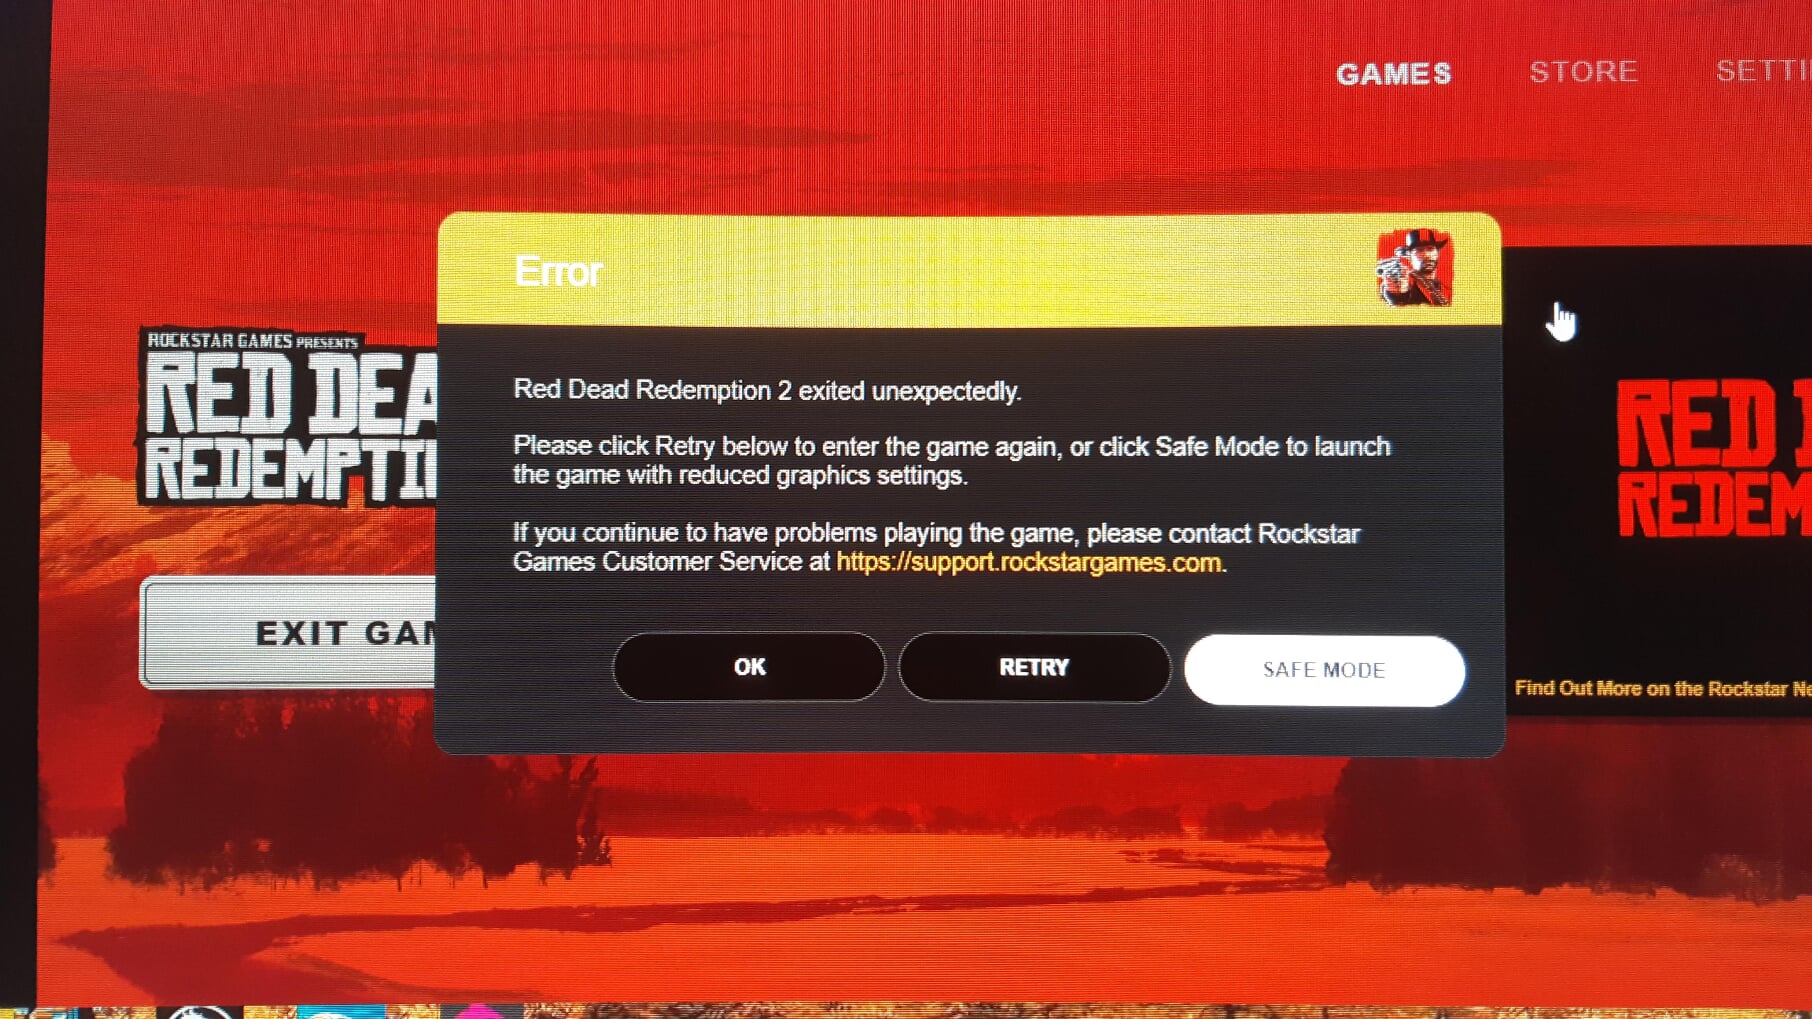 Error could not access game process shutdown rockstar games launcher and steam epic games store фото 115